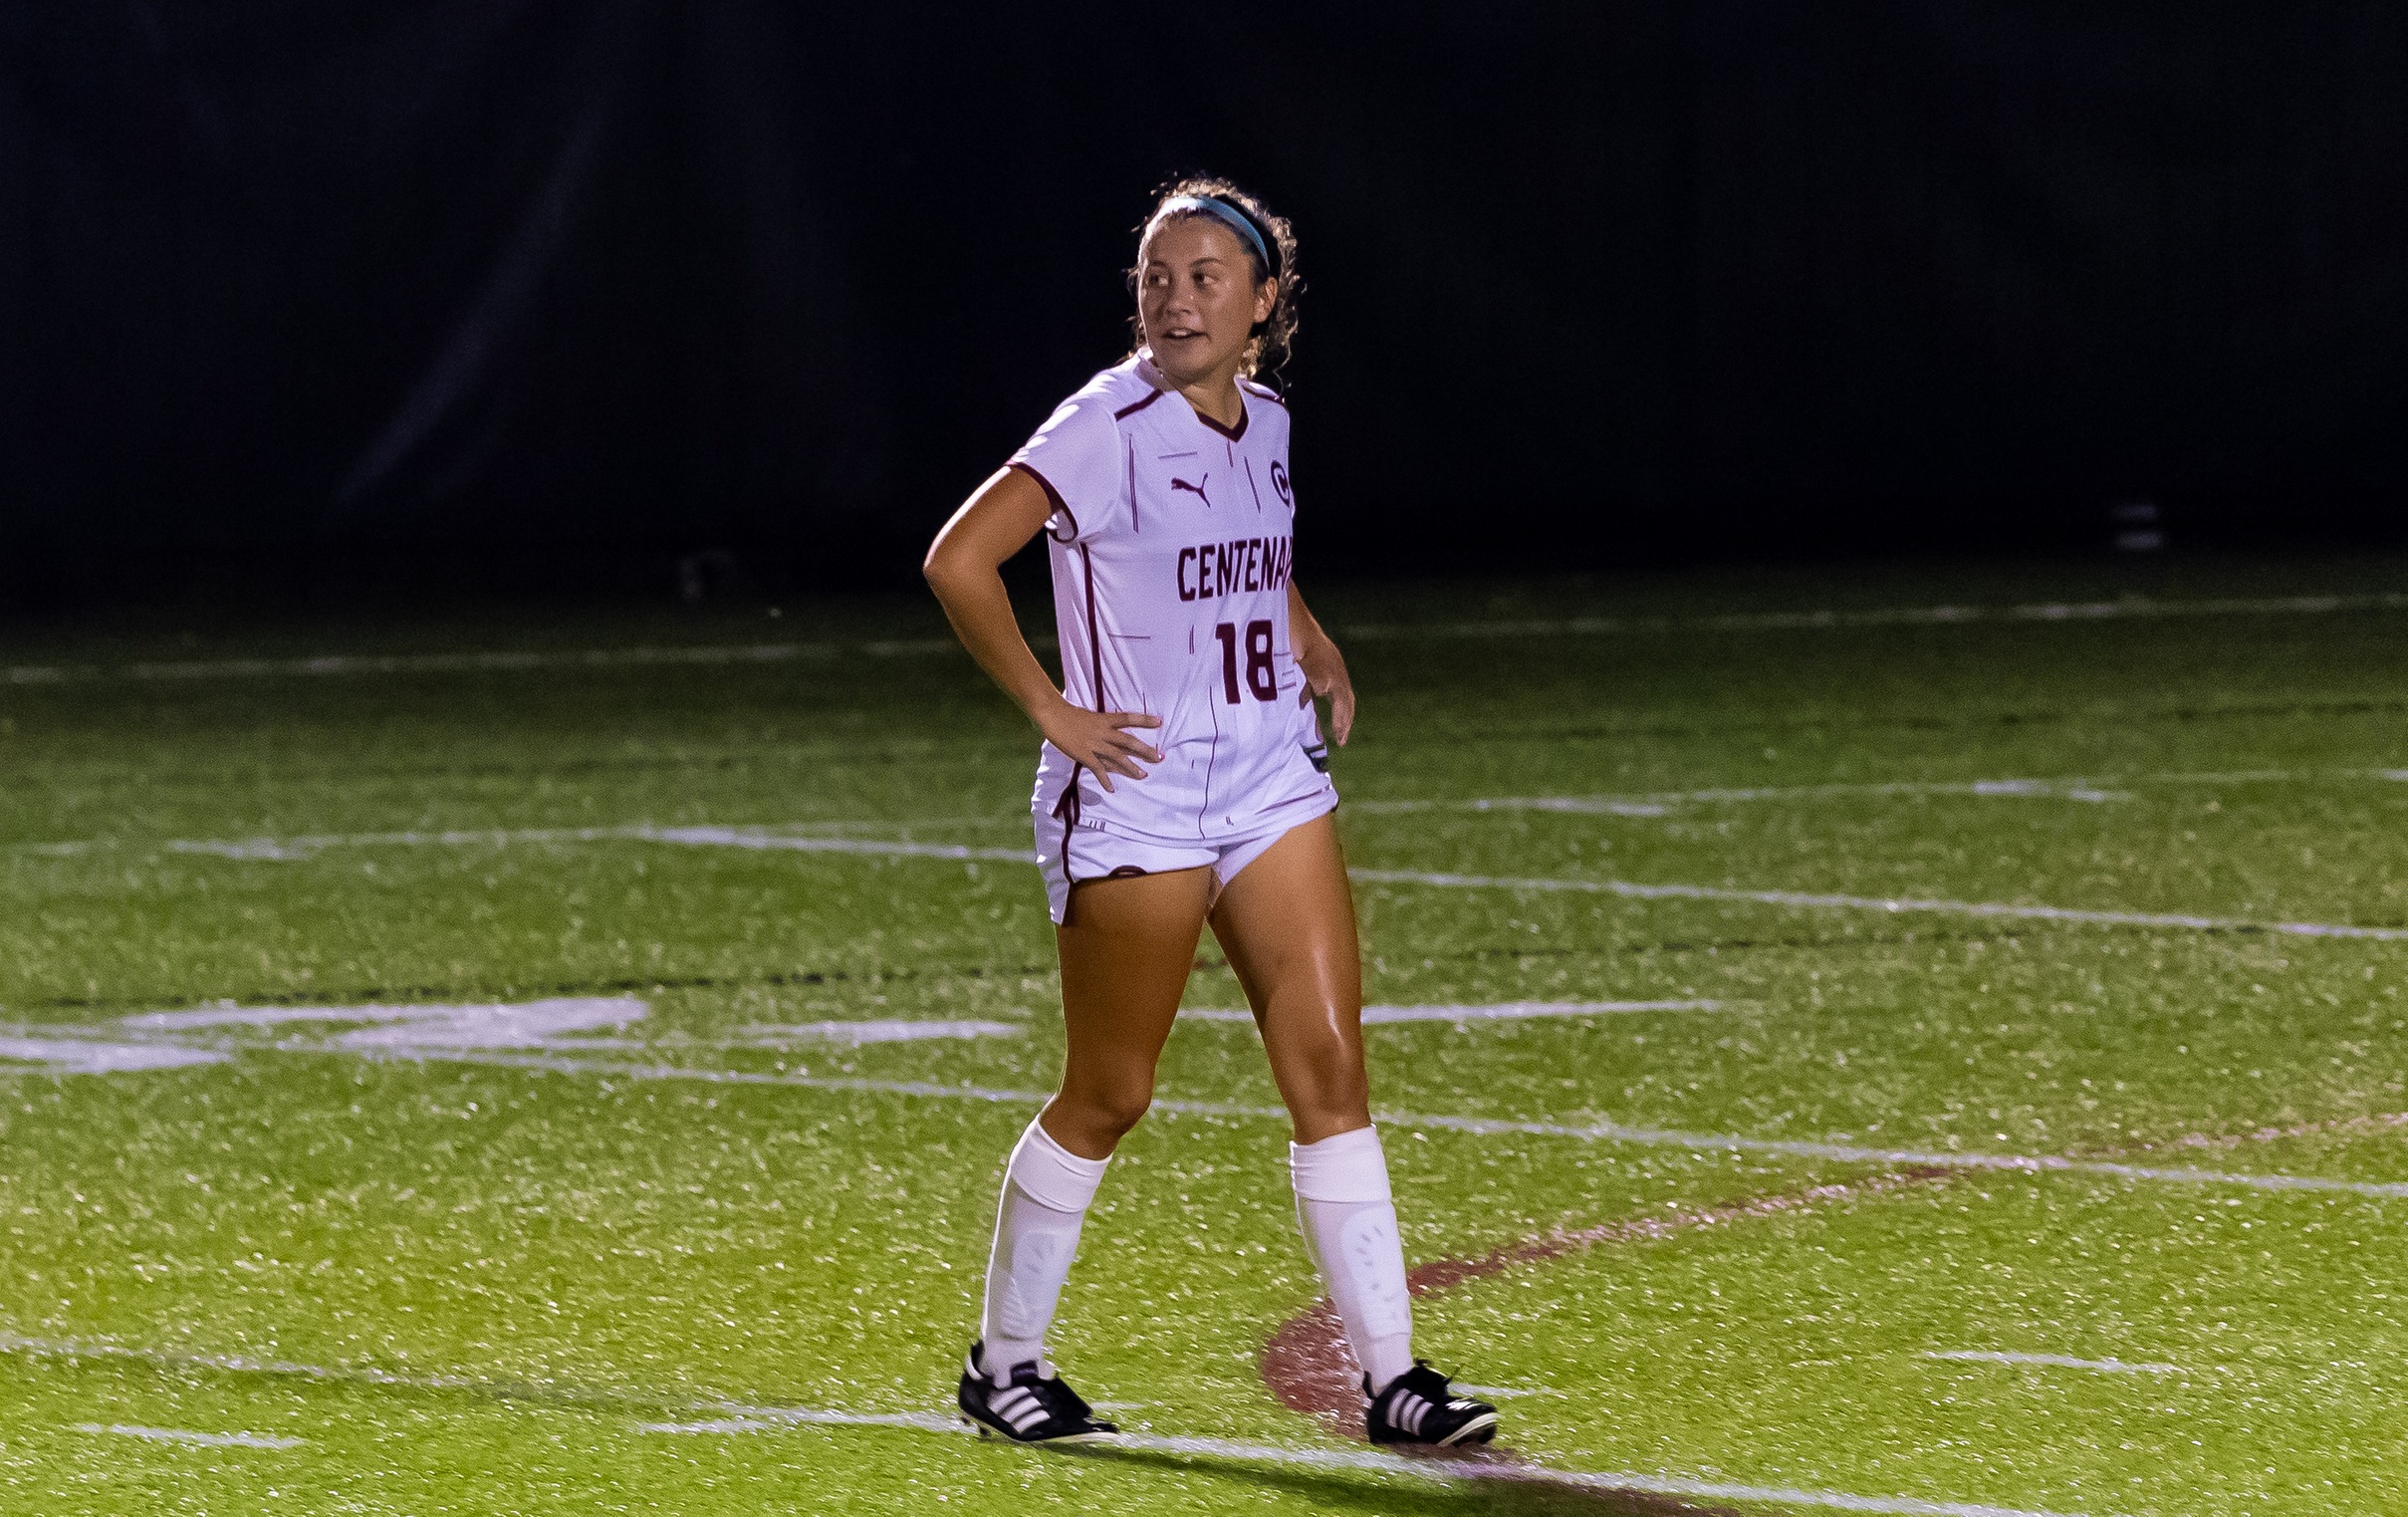 Kylie Zeller's first-career goal was the game-winning score for the Ladies on Tuesday.